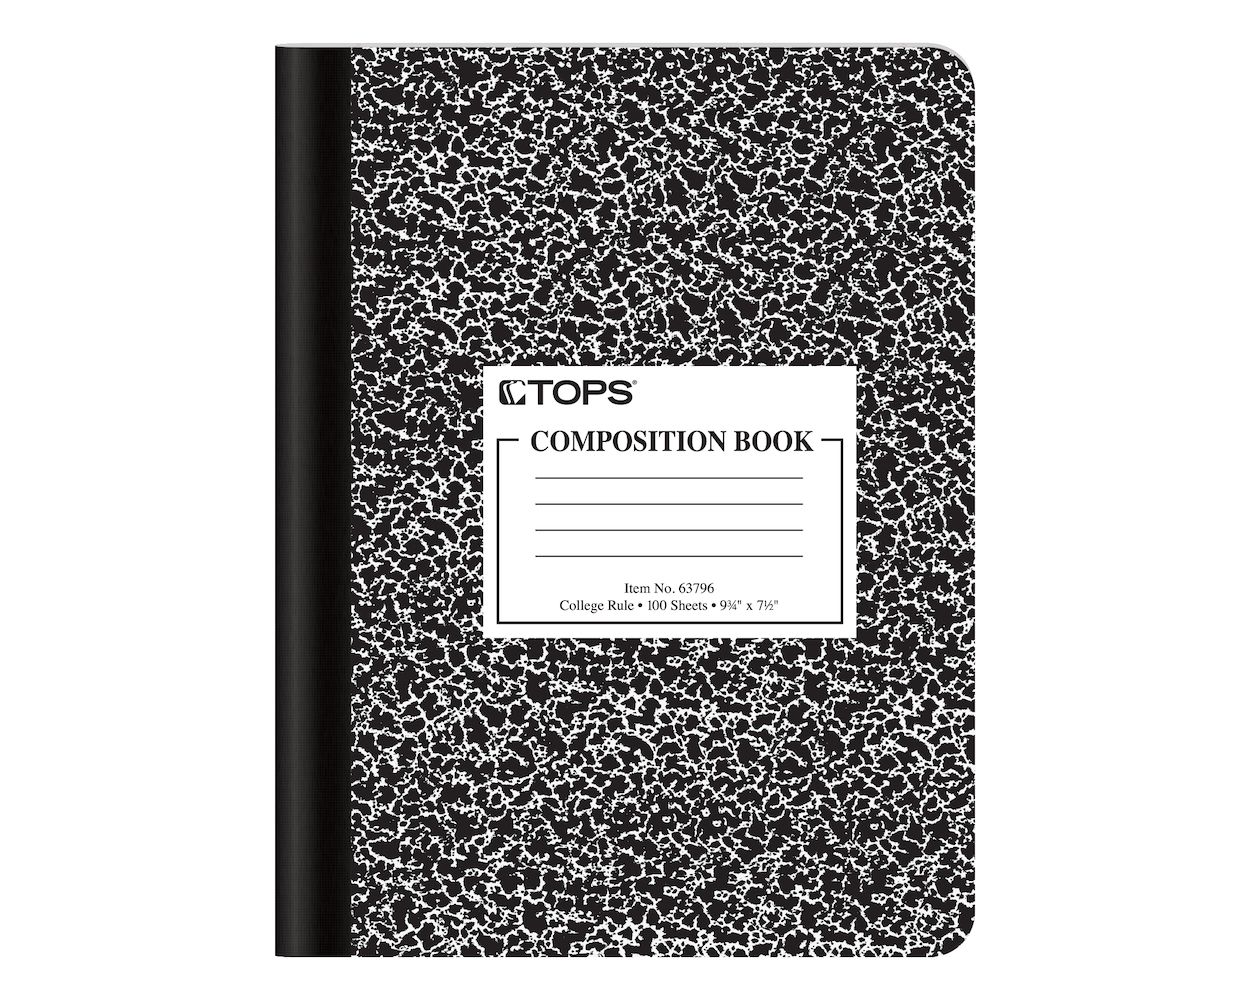 9-3/4 x 7-1/2 College Ruled Paper 1 Book 63796 100 Sheets - New Black Marble Covers Composition Notebook 